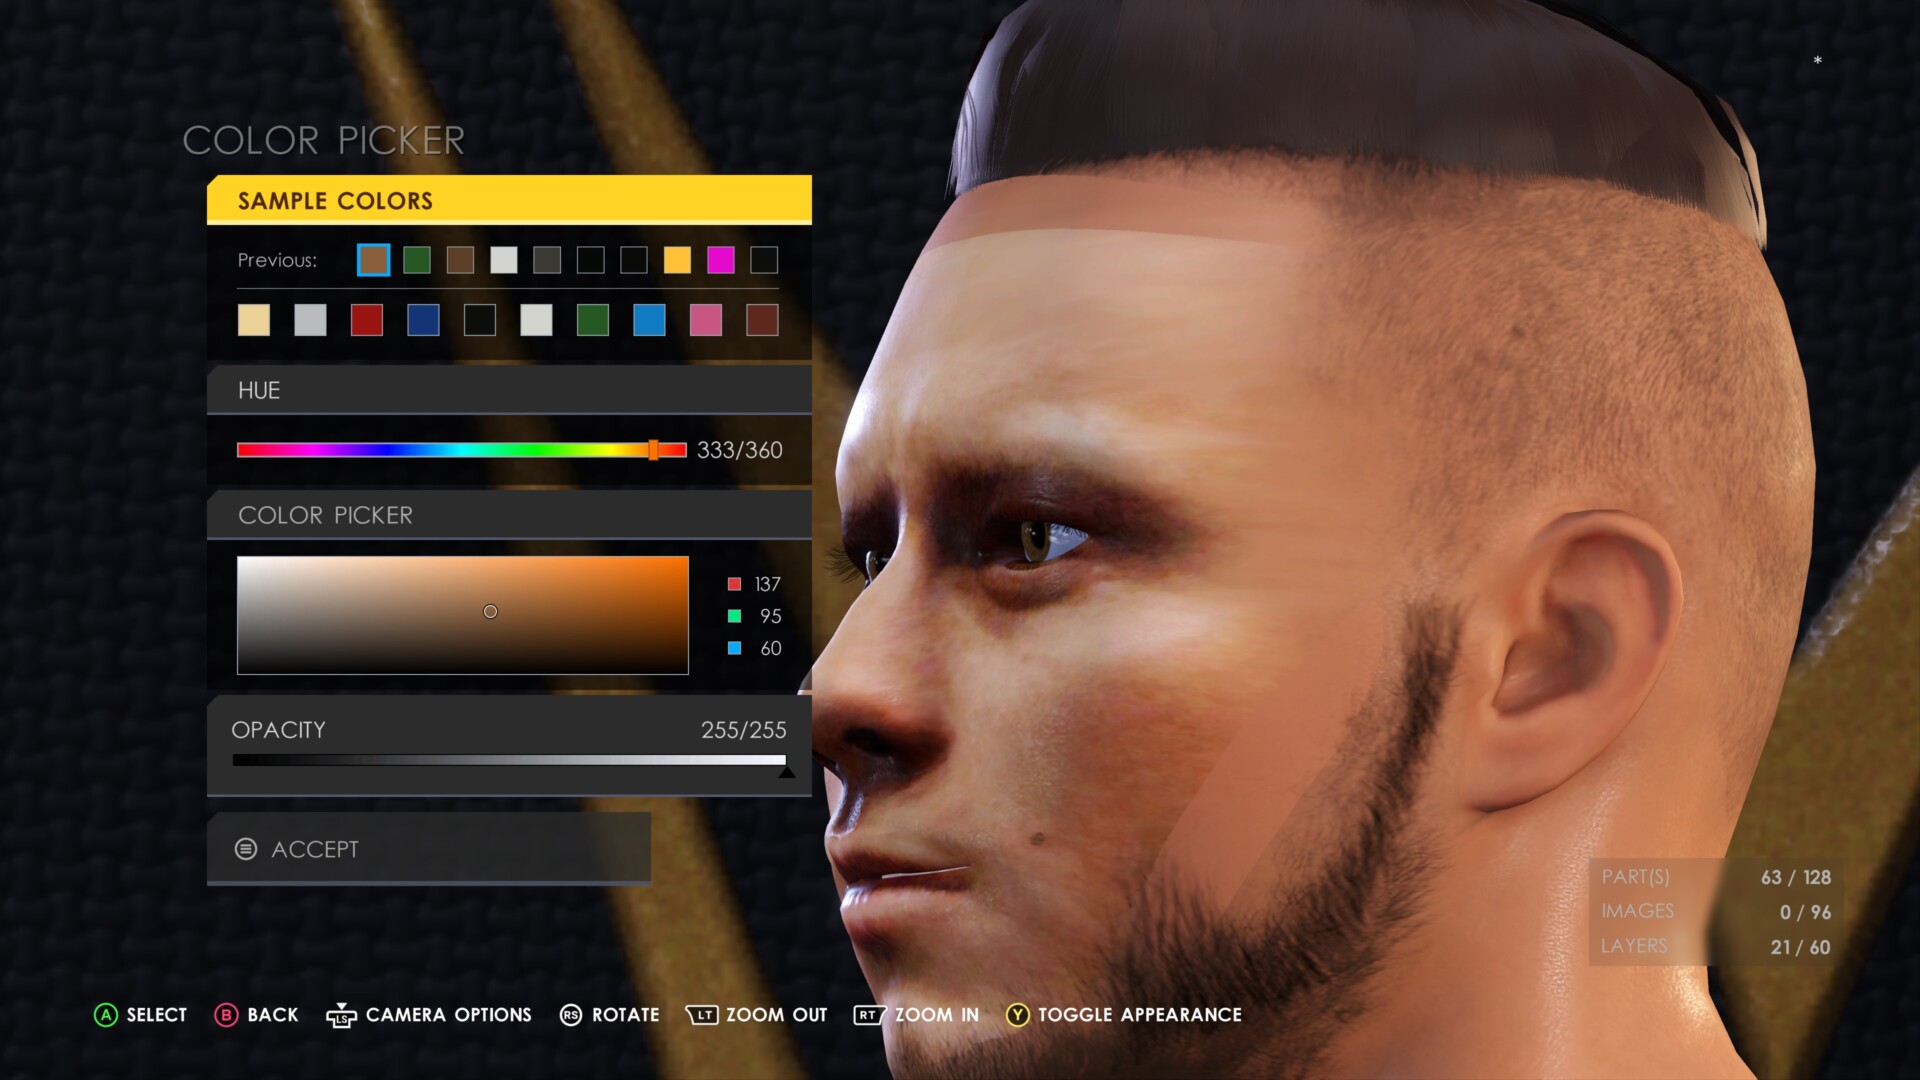 WWE 2K22 Image Upload And CAW Mode - How To Create Your Own Superstar